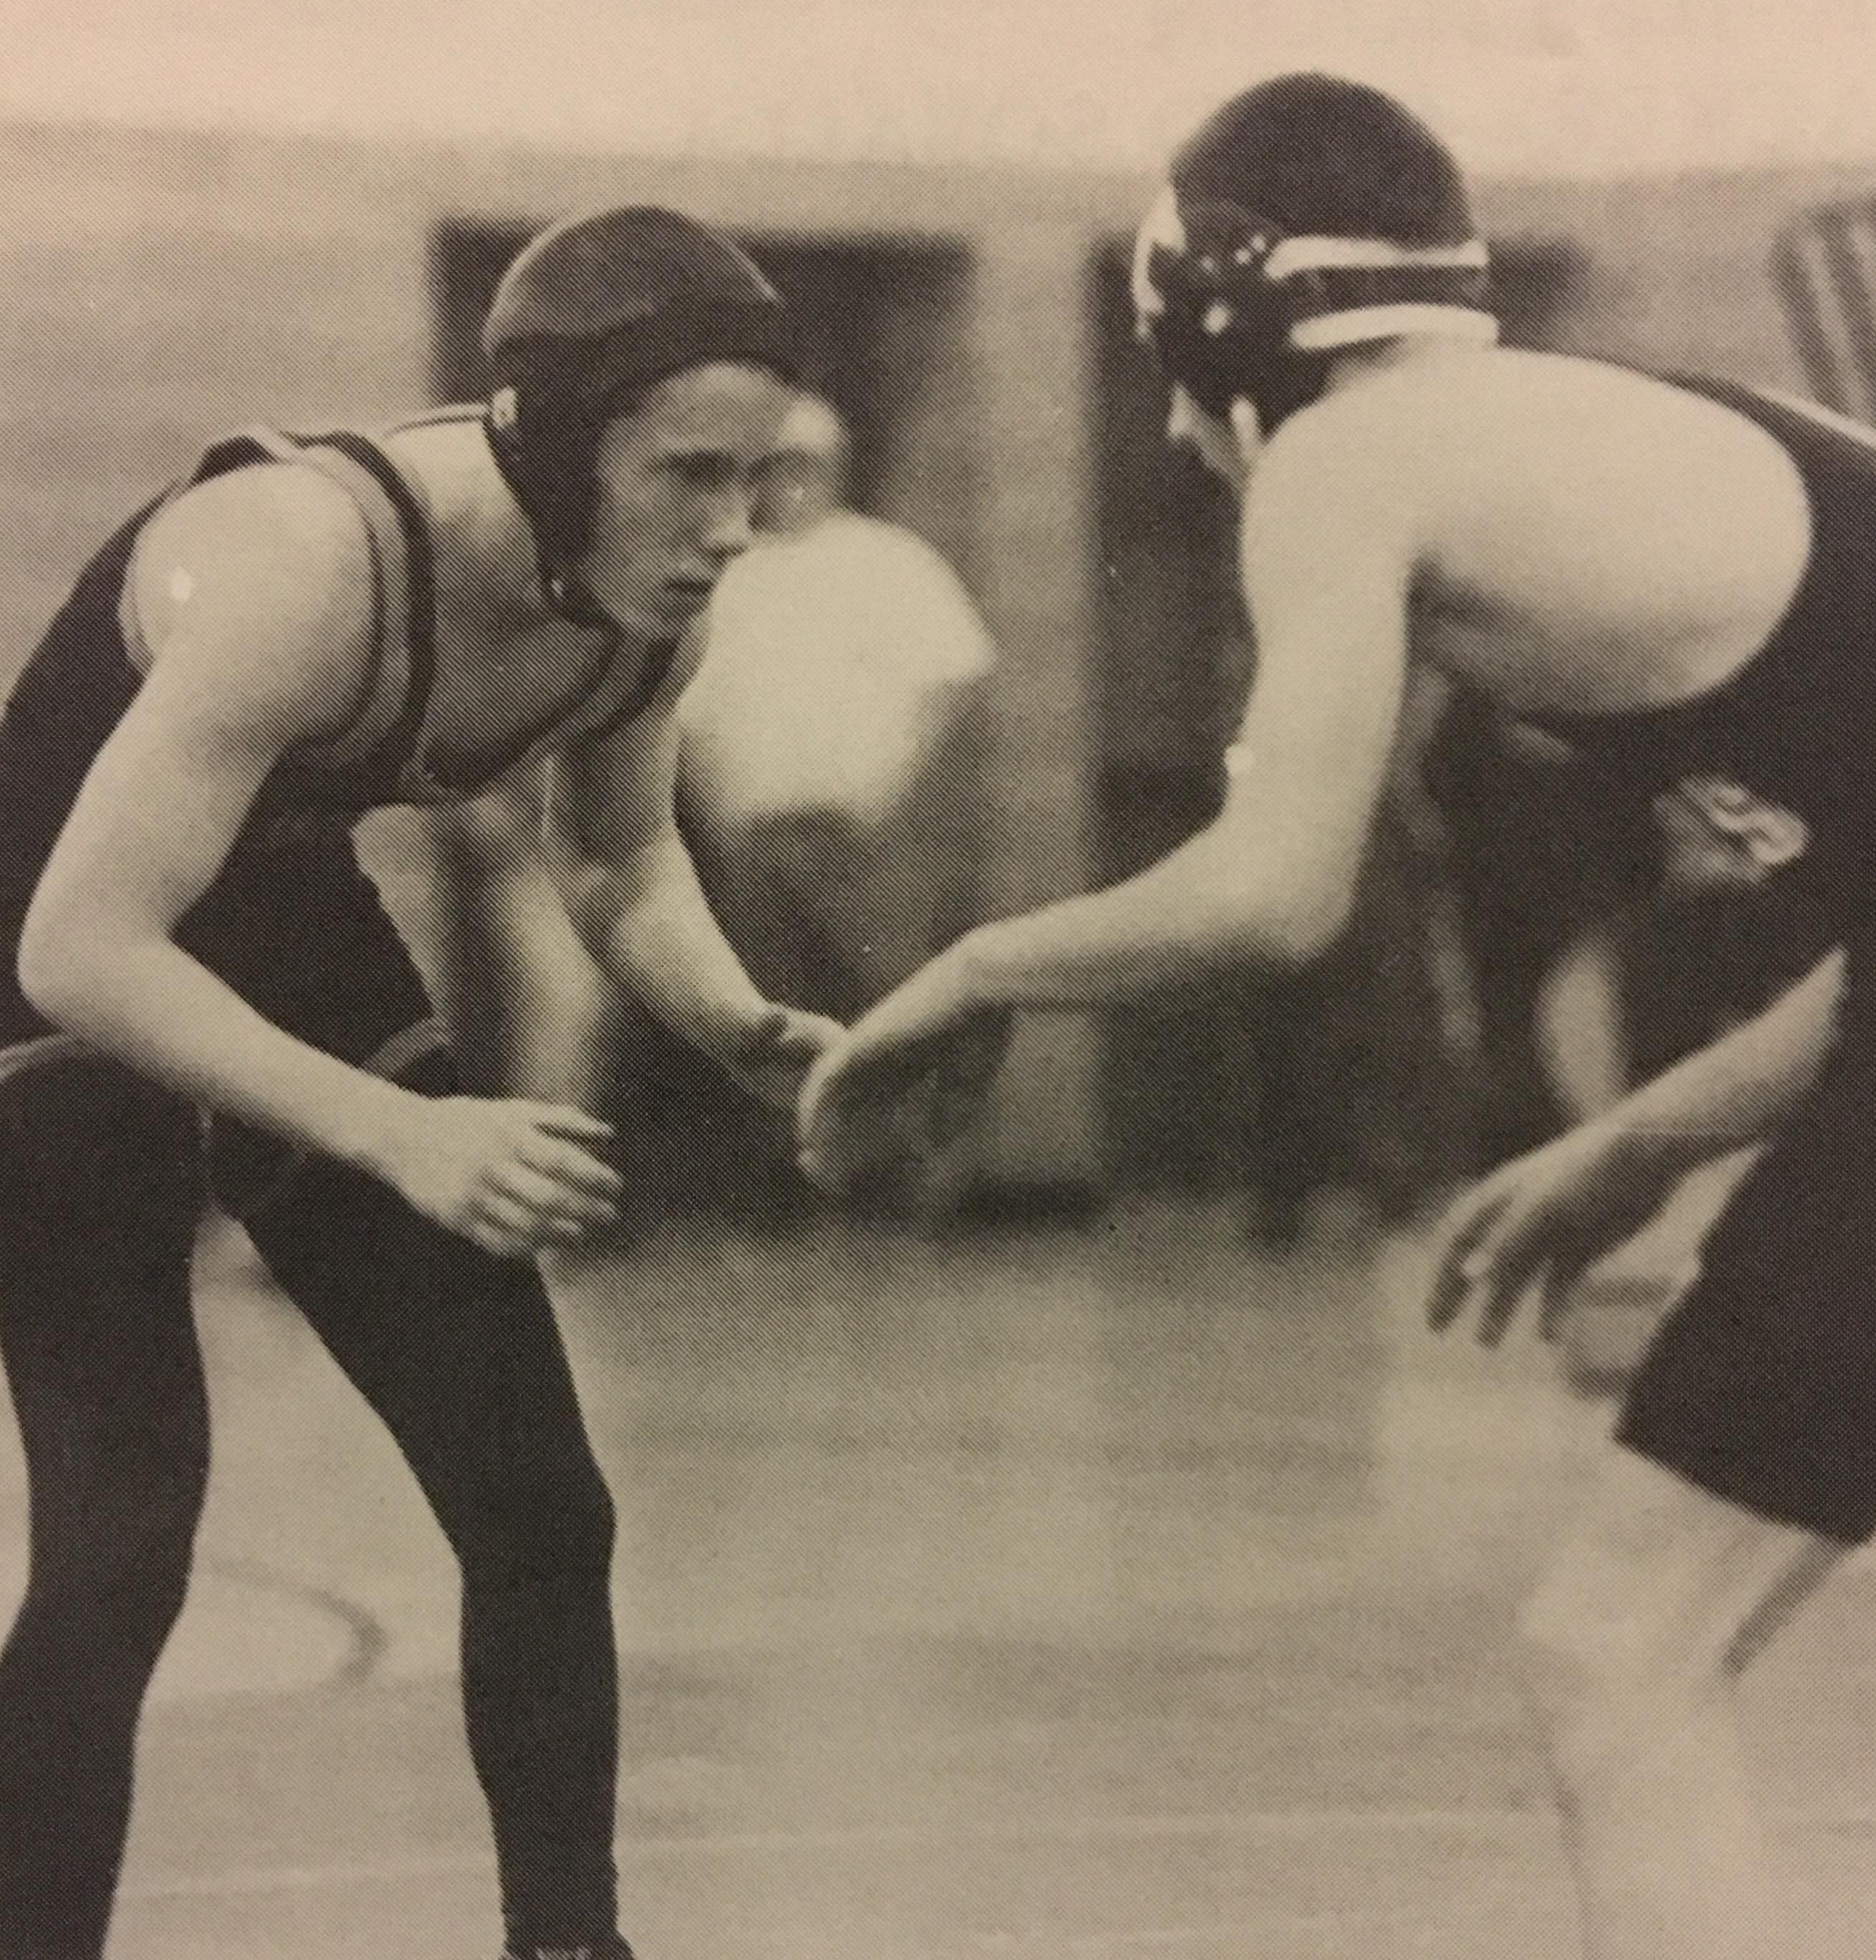 Troy Guenther locks in on his opponent.